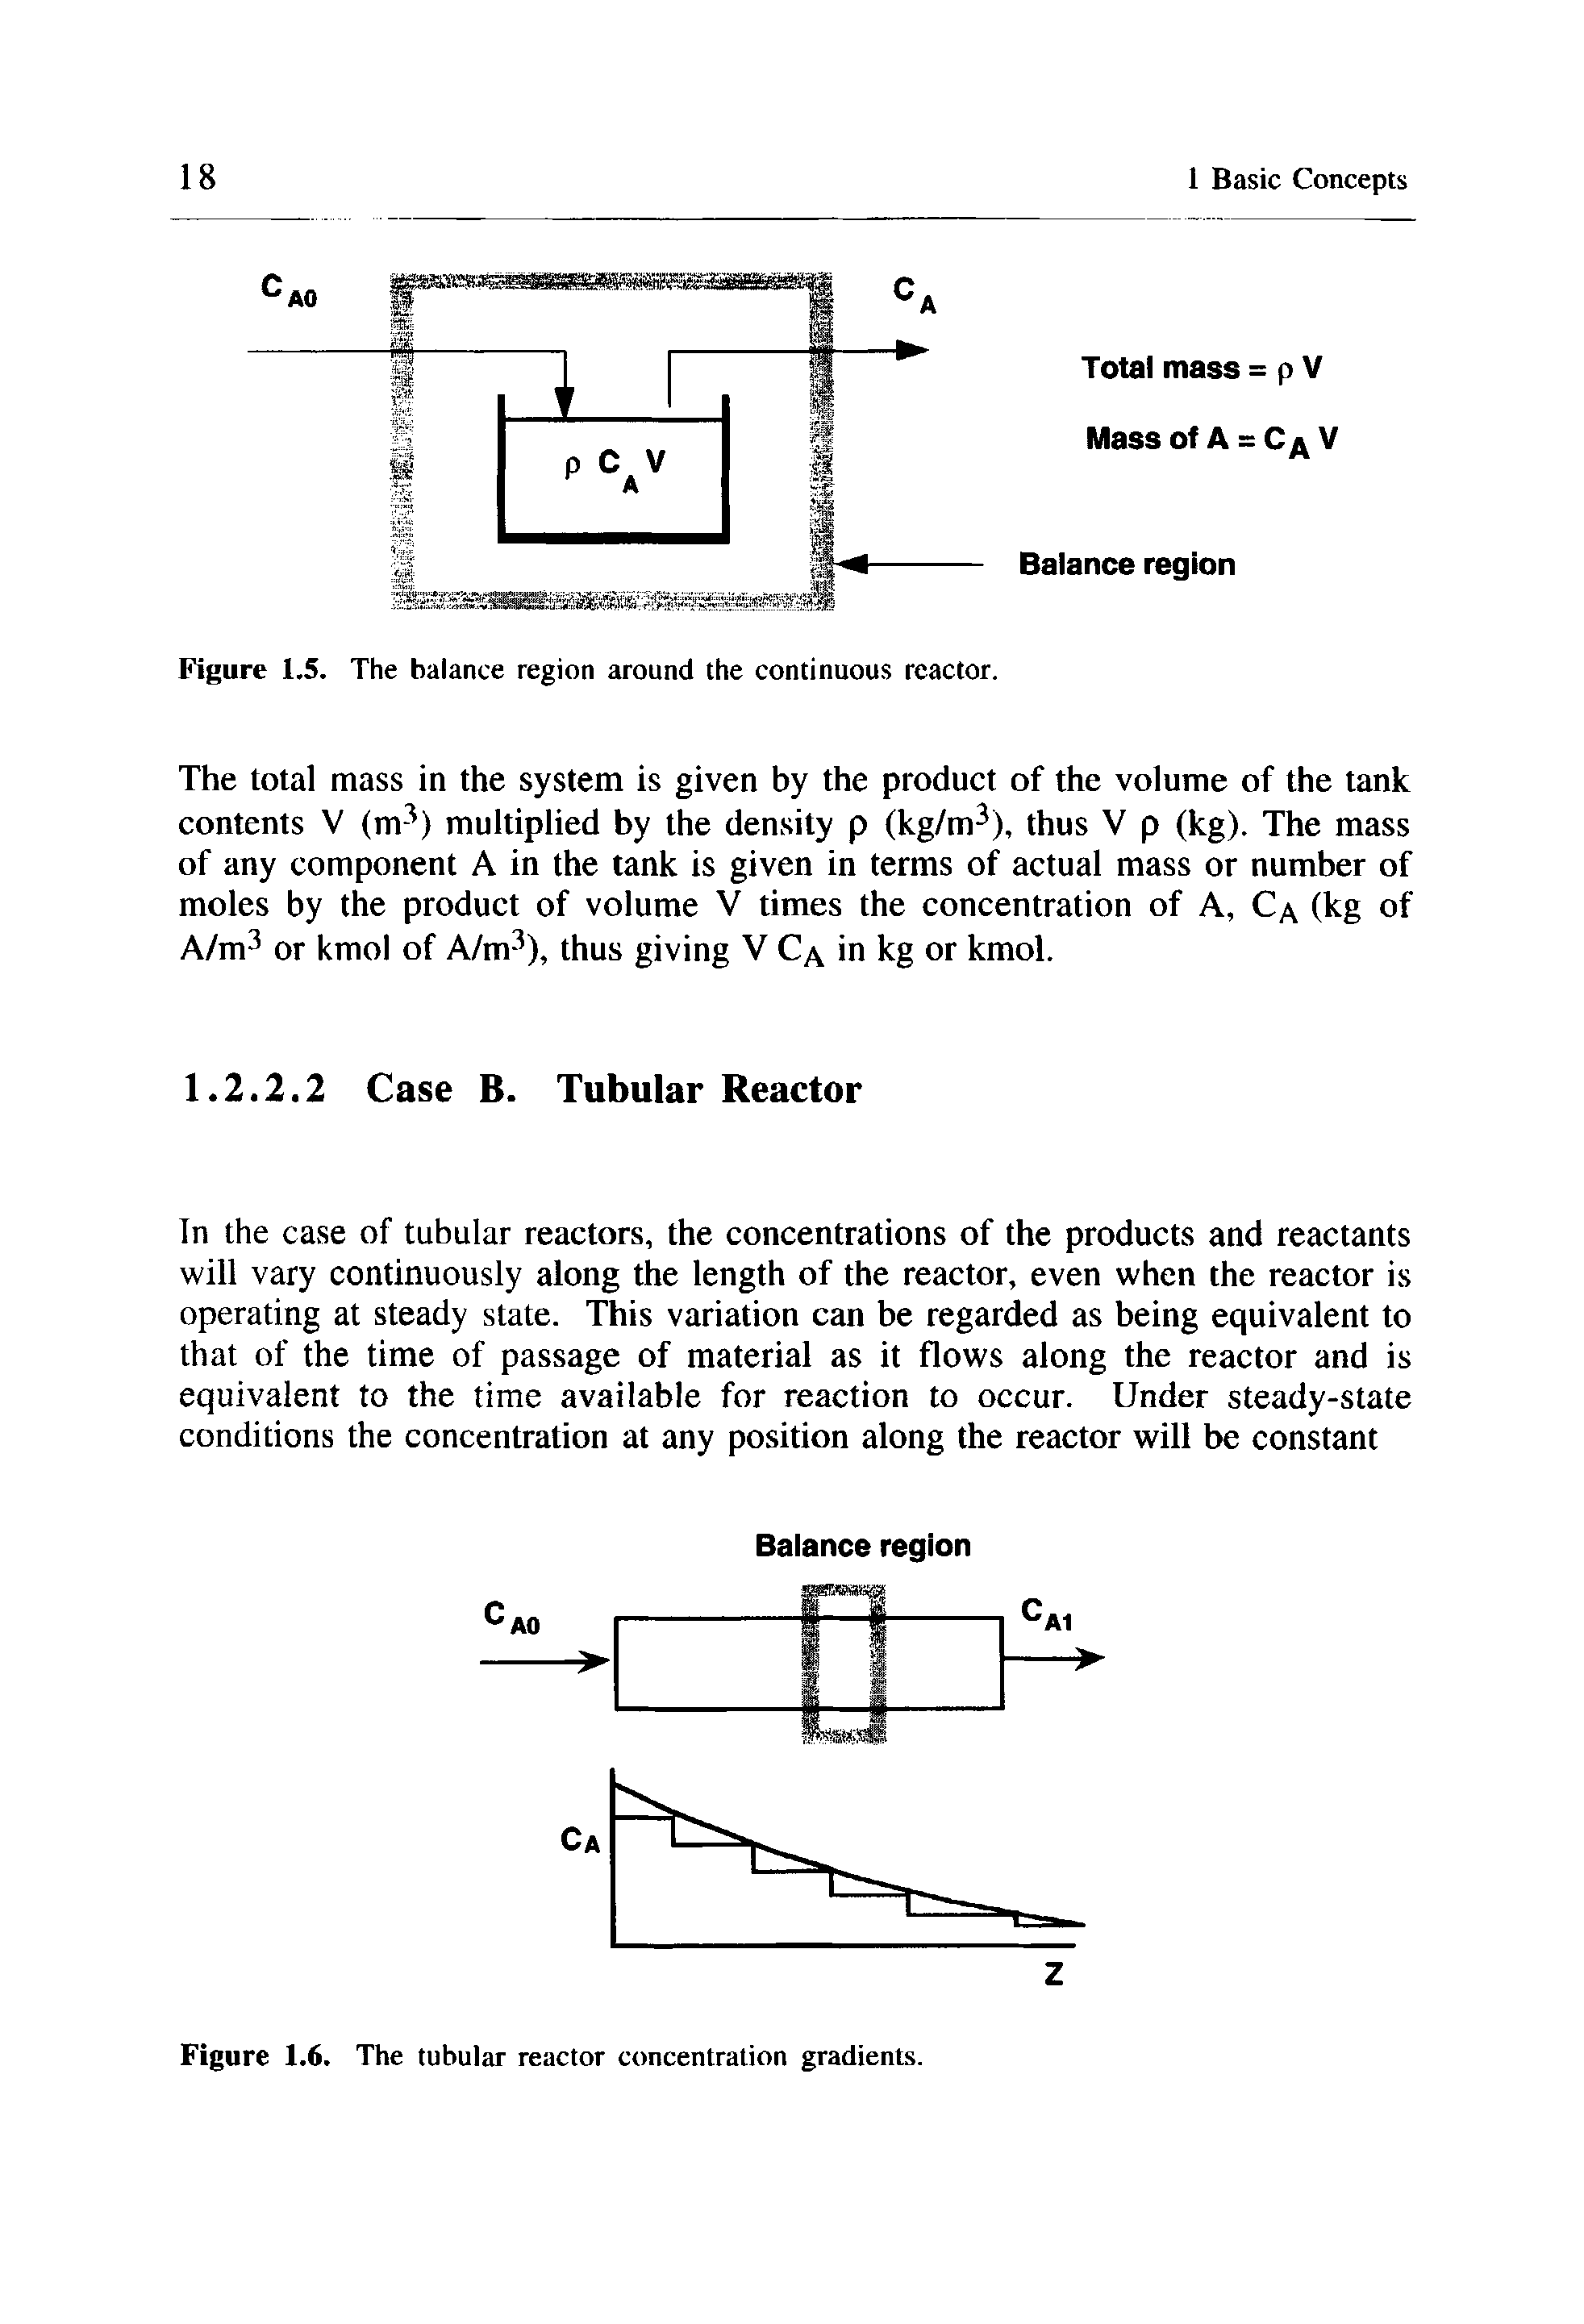 Figure 1.5. The balance region around the continuous reactor.